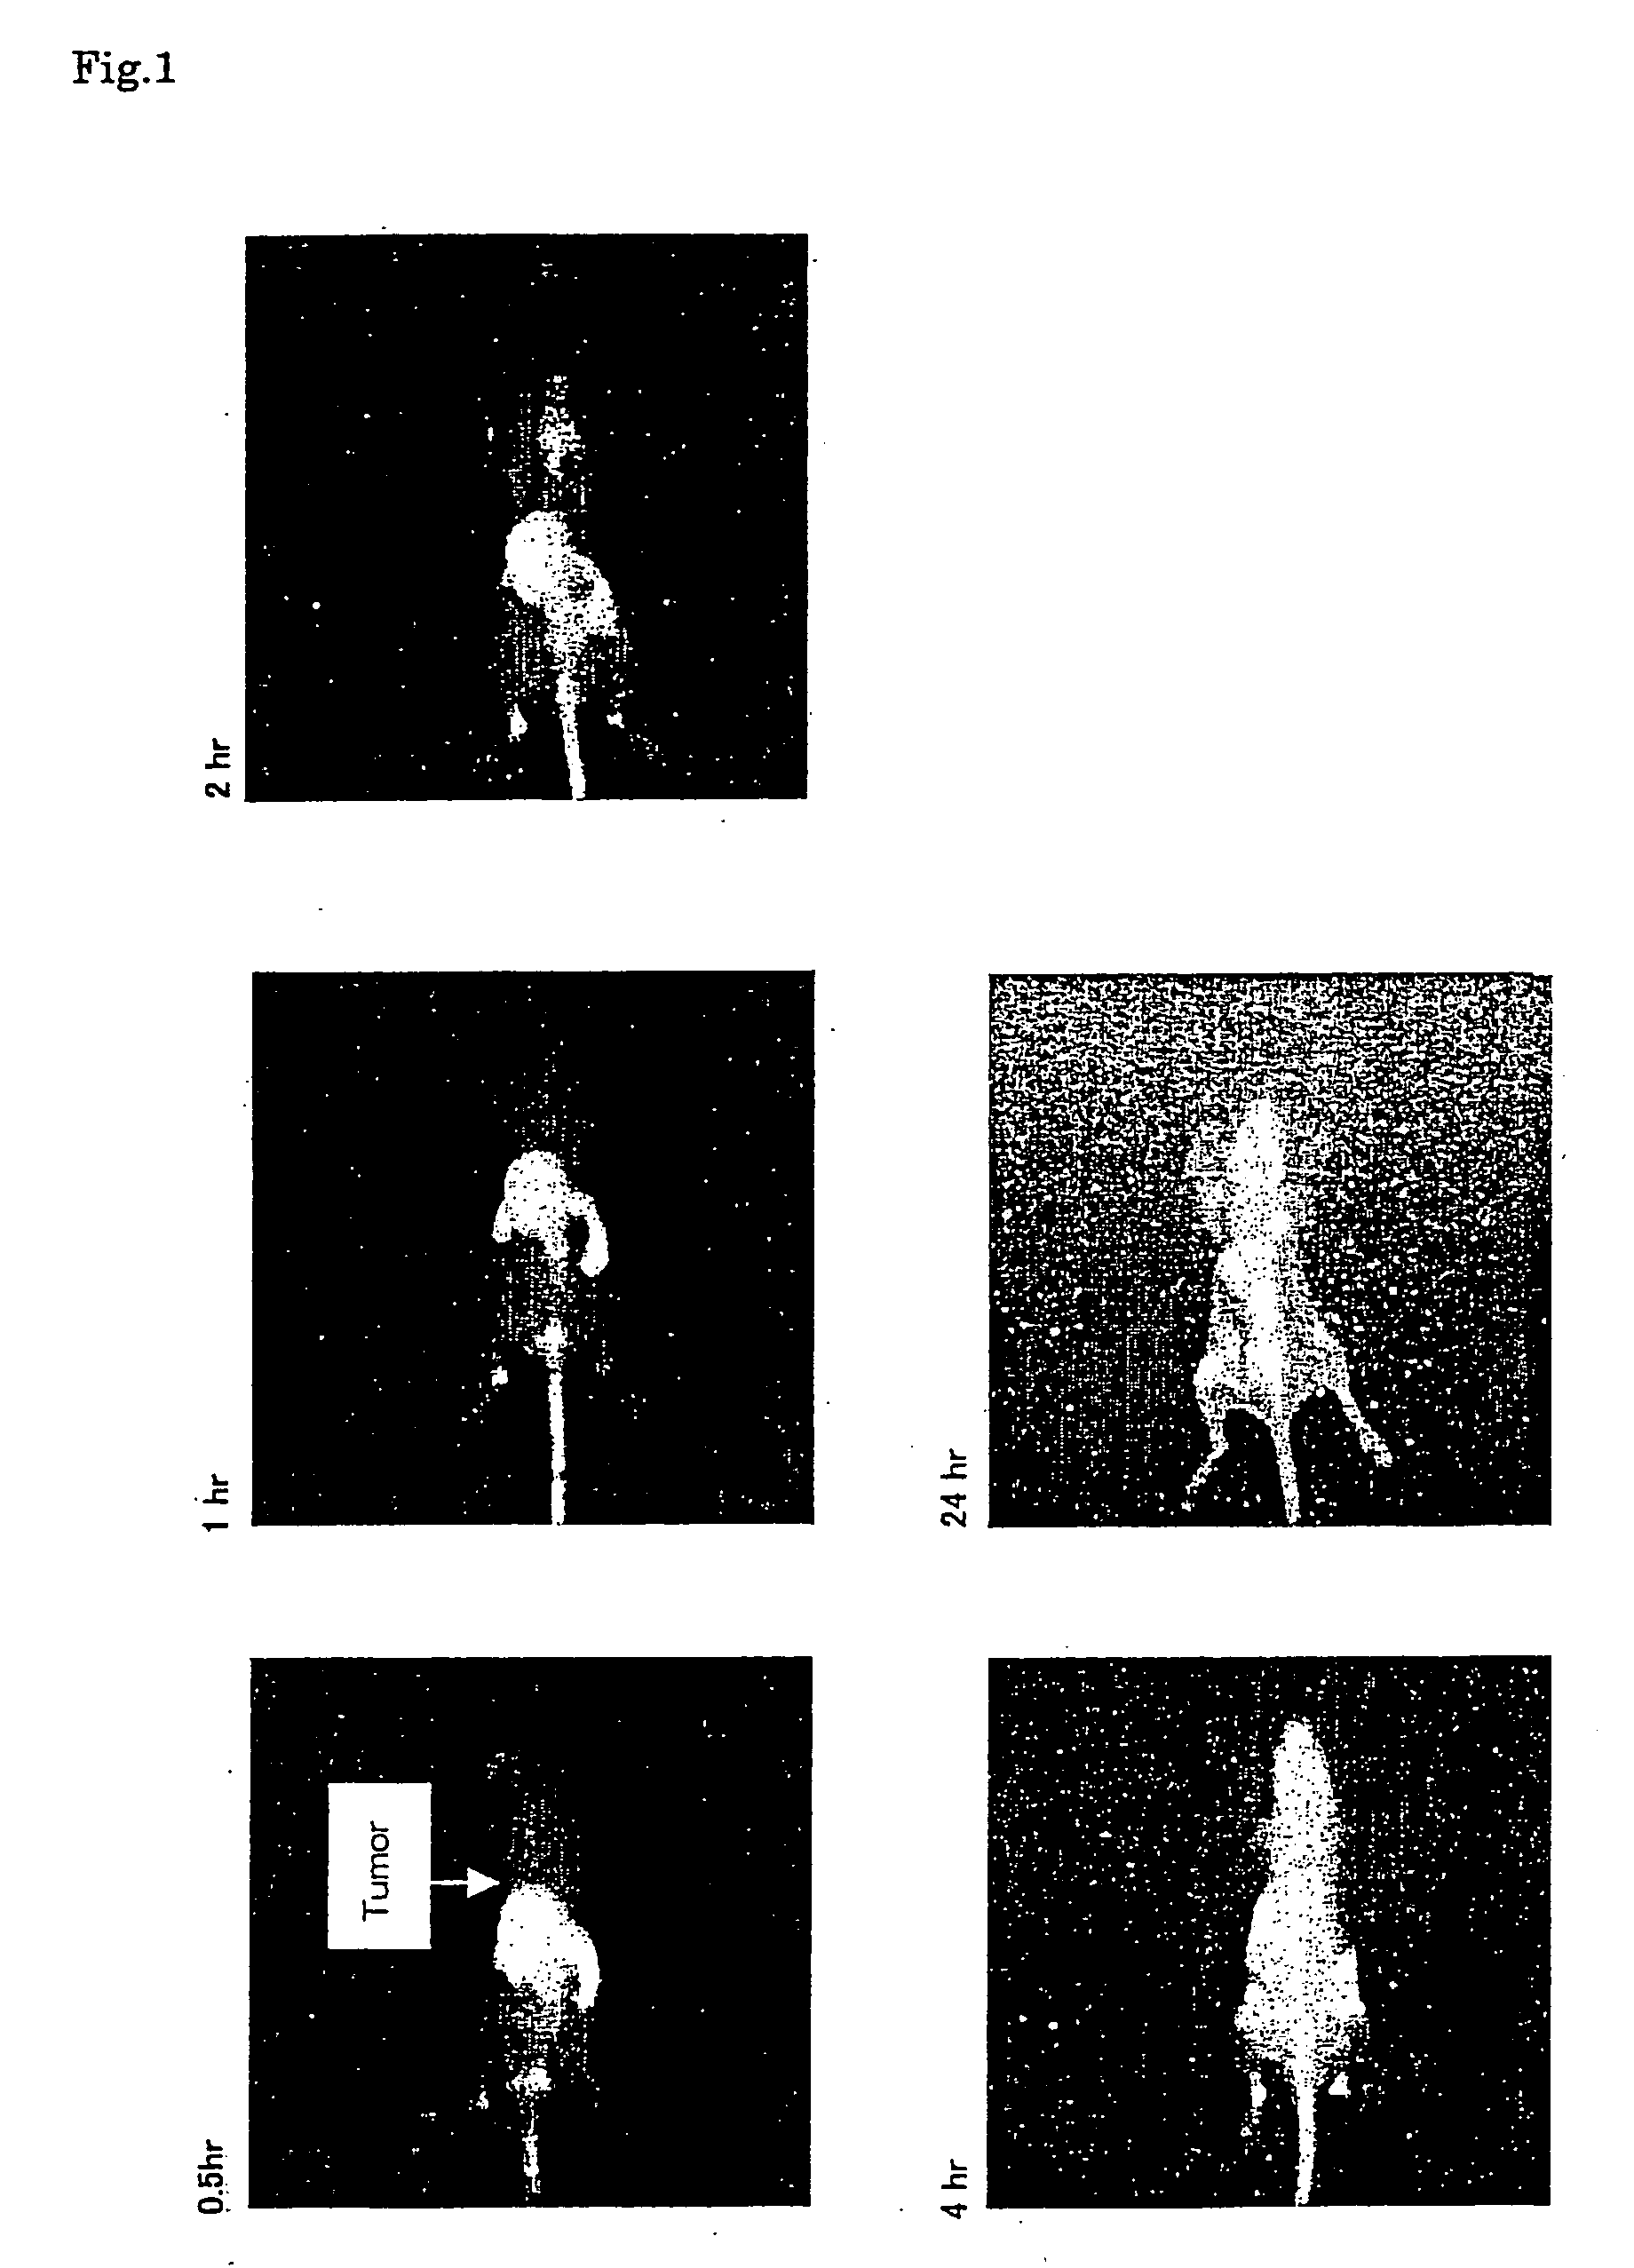 Near infrared fluorescent contrast agent and method for fluorescence imaging